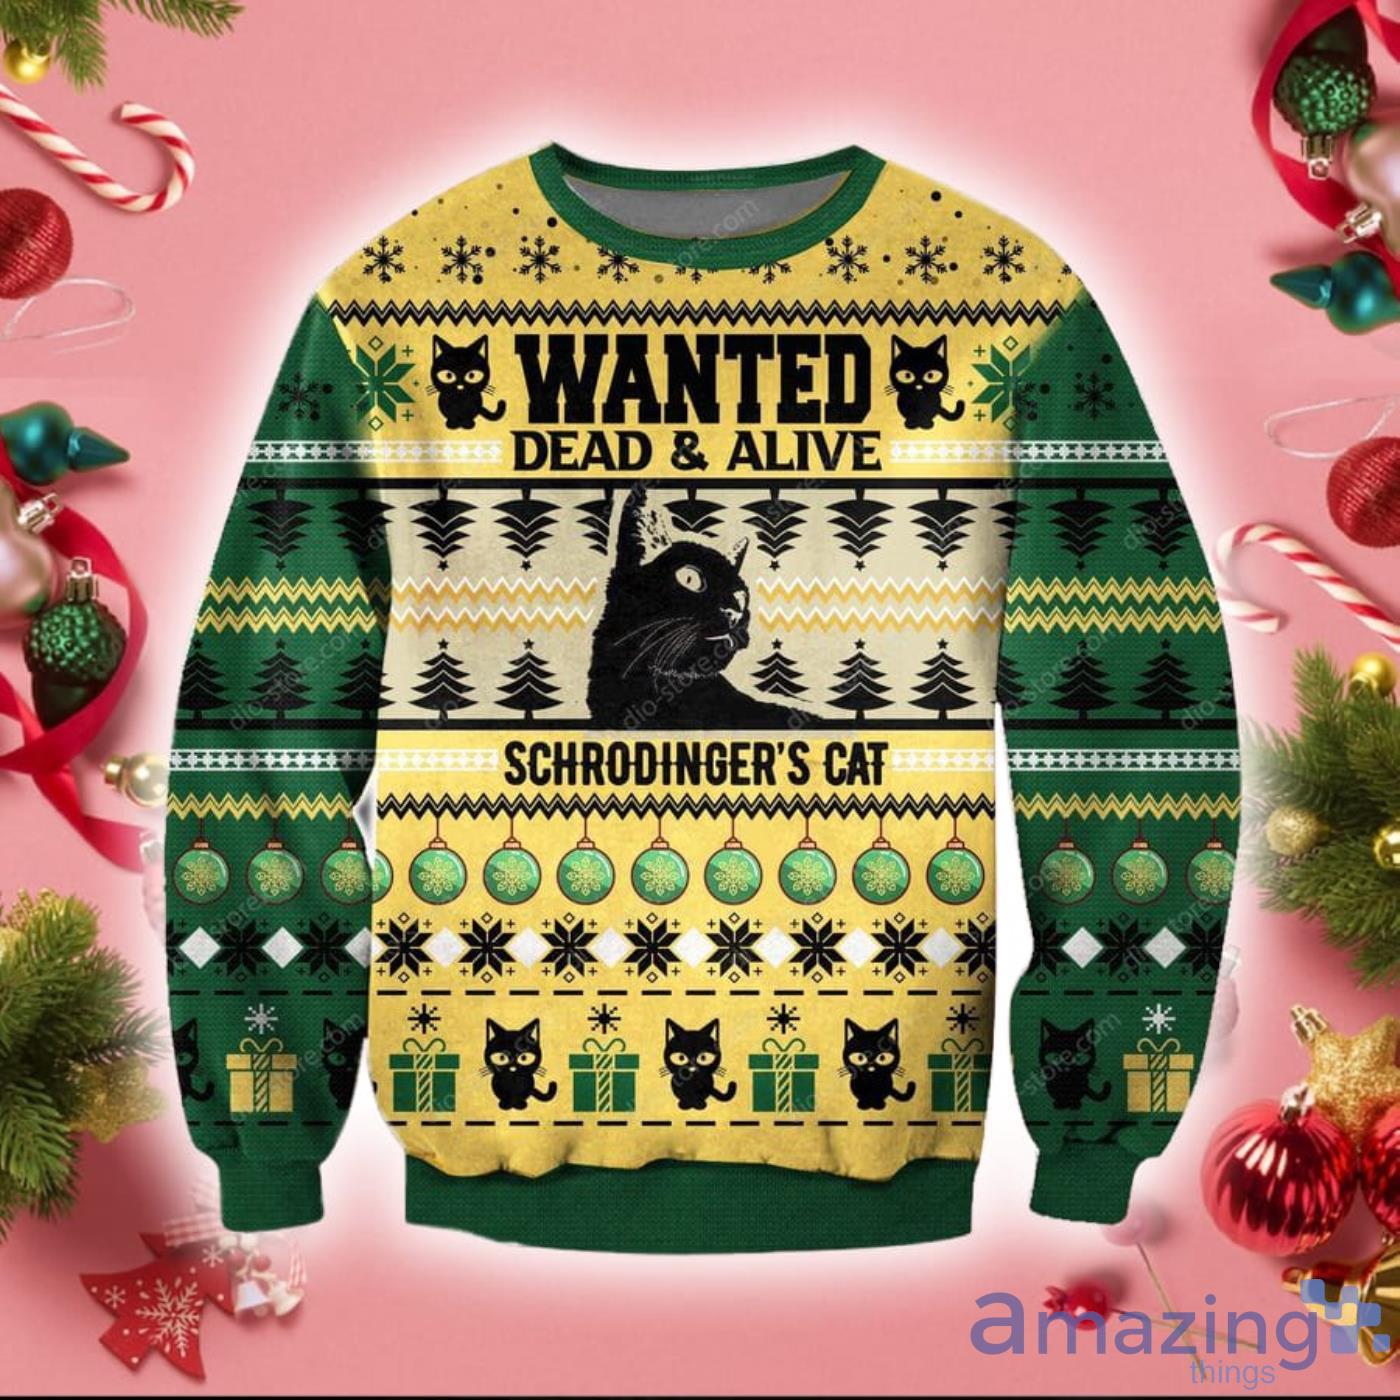 Black Cat Wanted Dead & Alive Schrodingers Cat Christmas Sweatshirt Sweater Product Photo 1